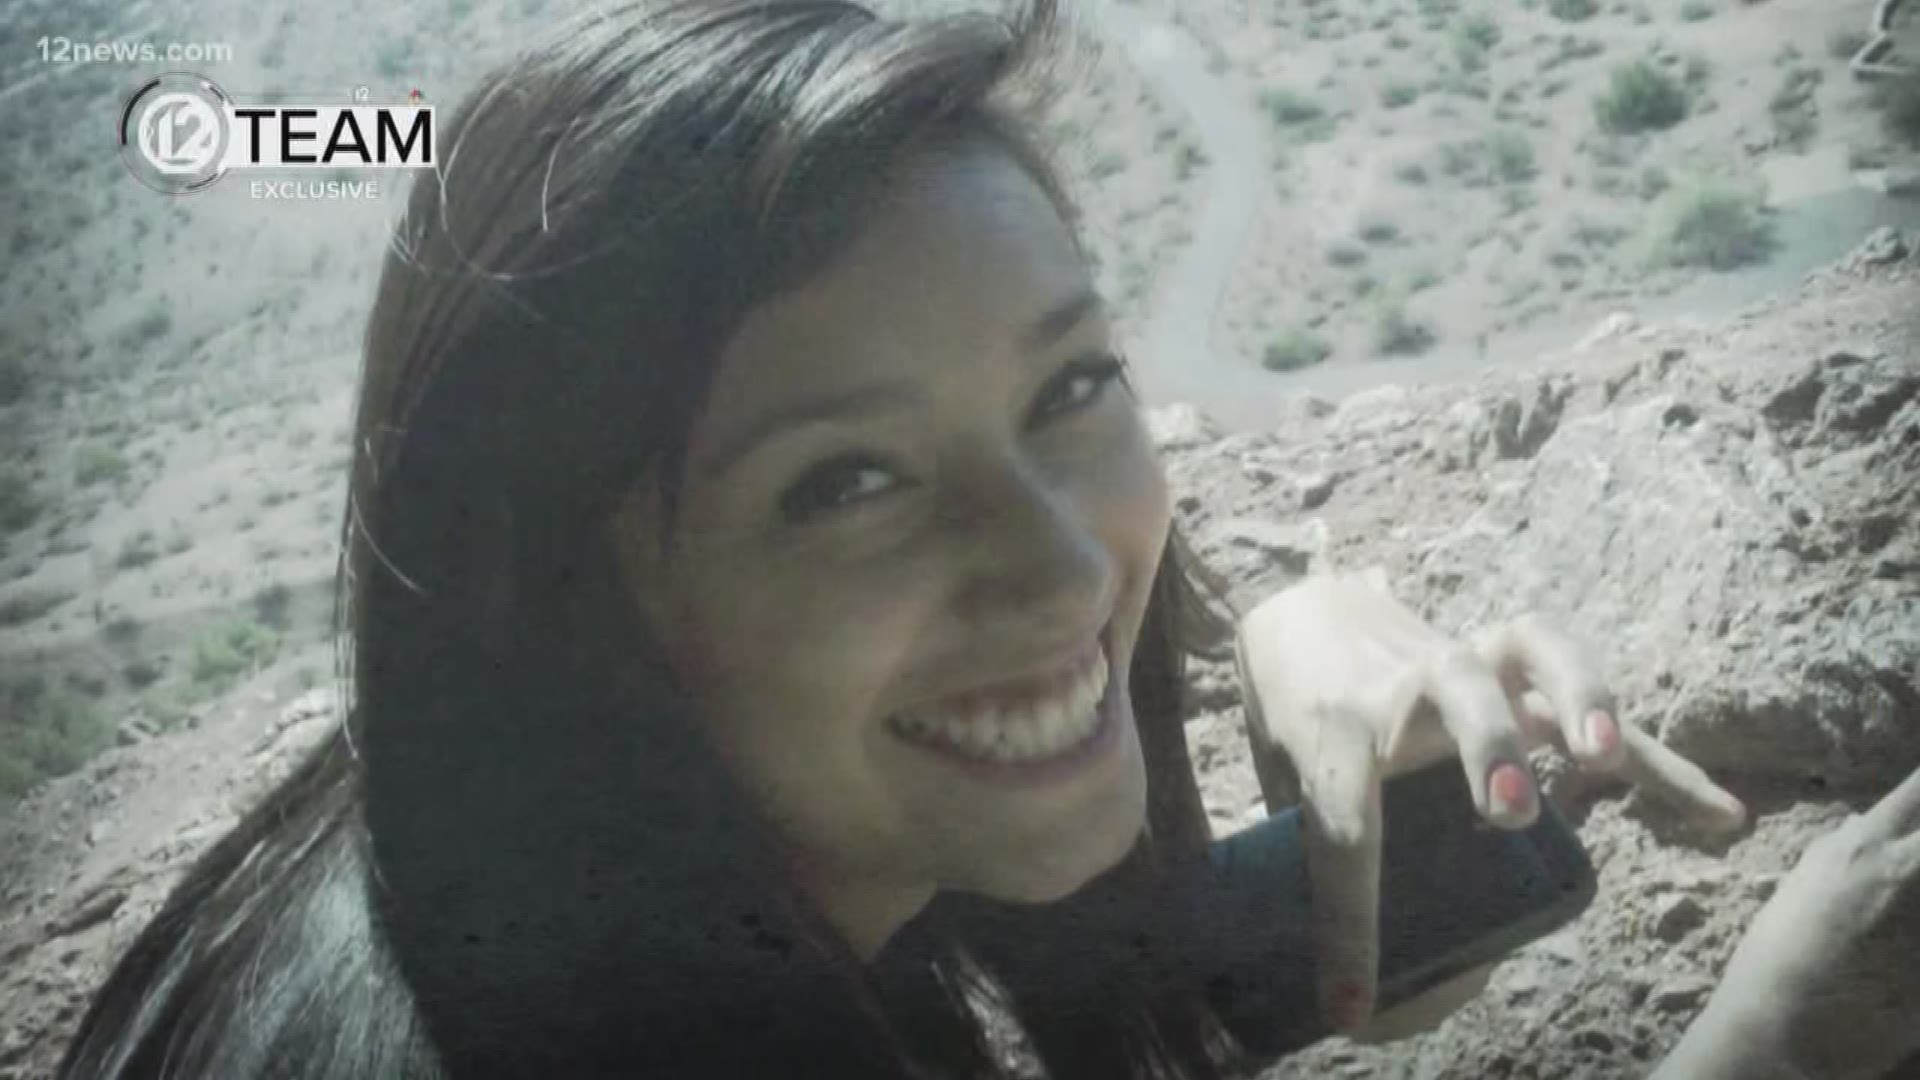 Years after Adrienne Salinas's body was found, her murder remains unsolved.